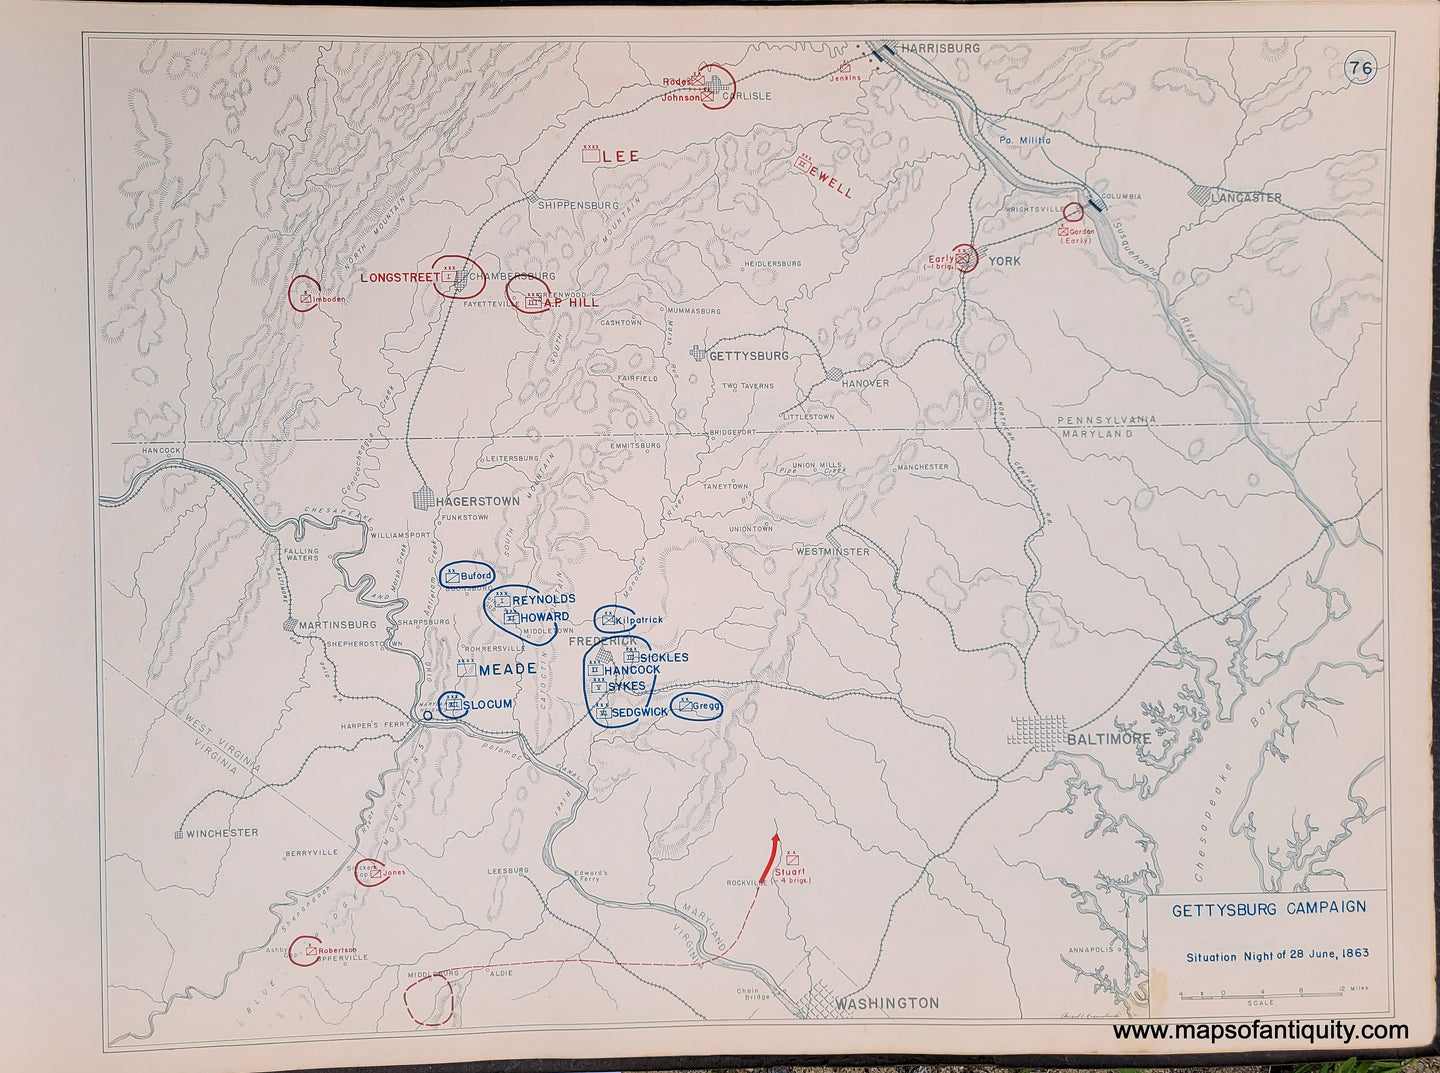 Genuine-Antique-Map-Gettysburg-Campaign-Situation-Night-of-28-June-1863-1948-Matthew-Forney-Steele-Dept-of-Military-Art-and-Engineering-US-Military-Academy-West-Point-Maps-Of-Antiquity